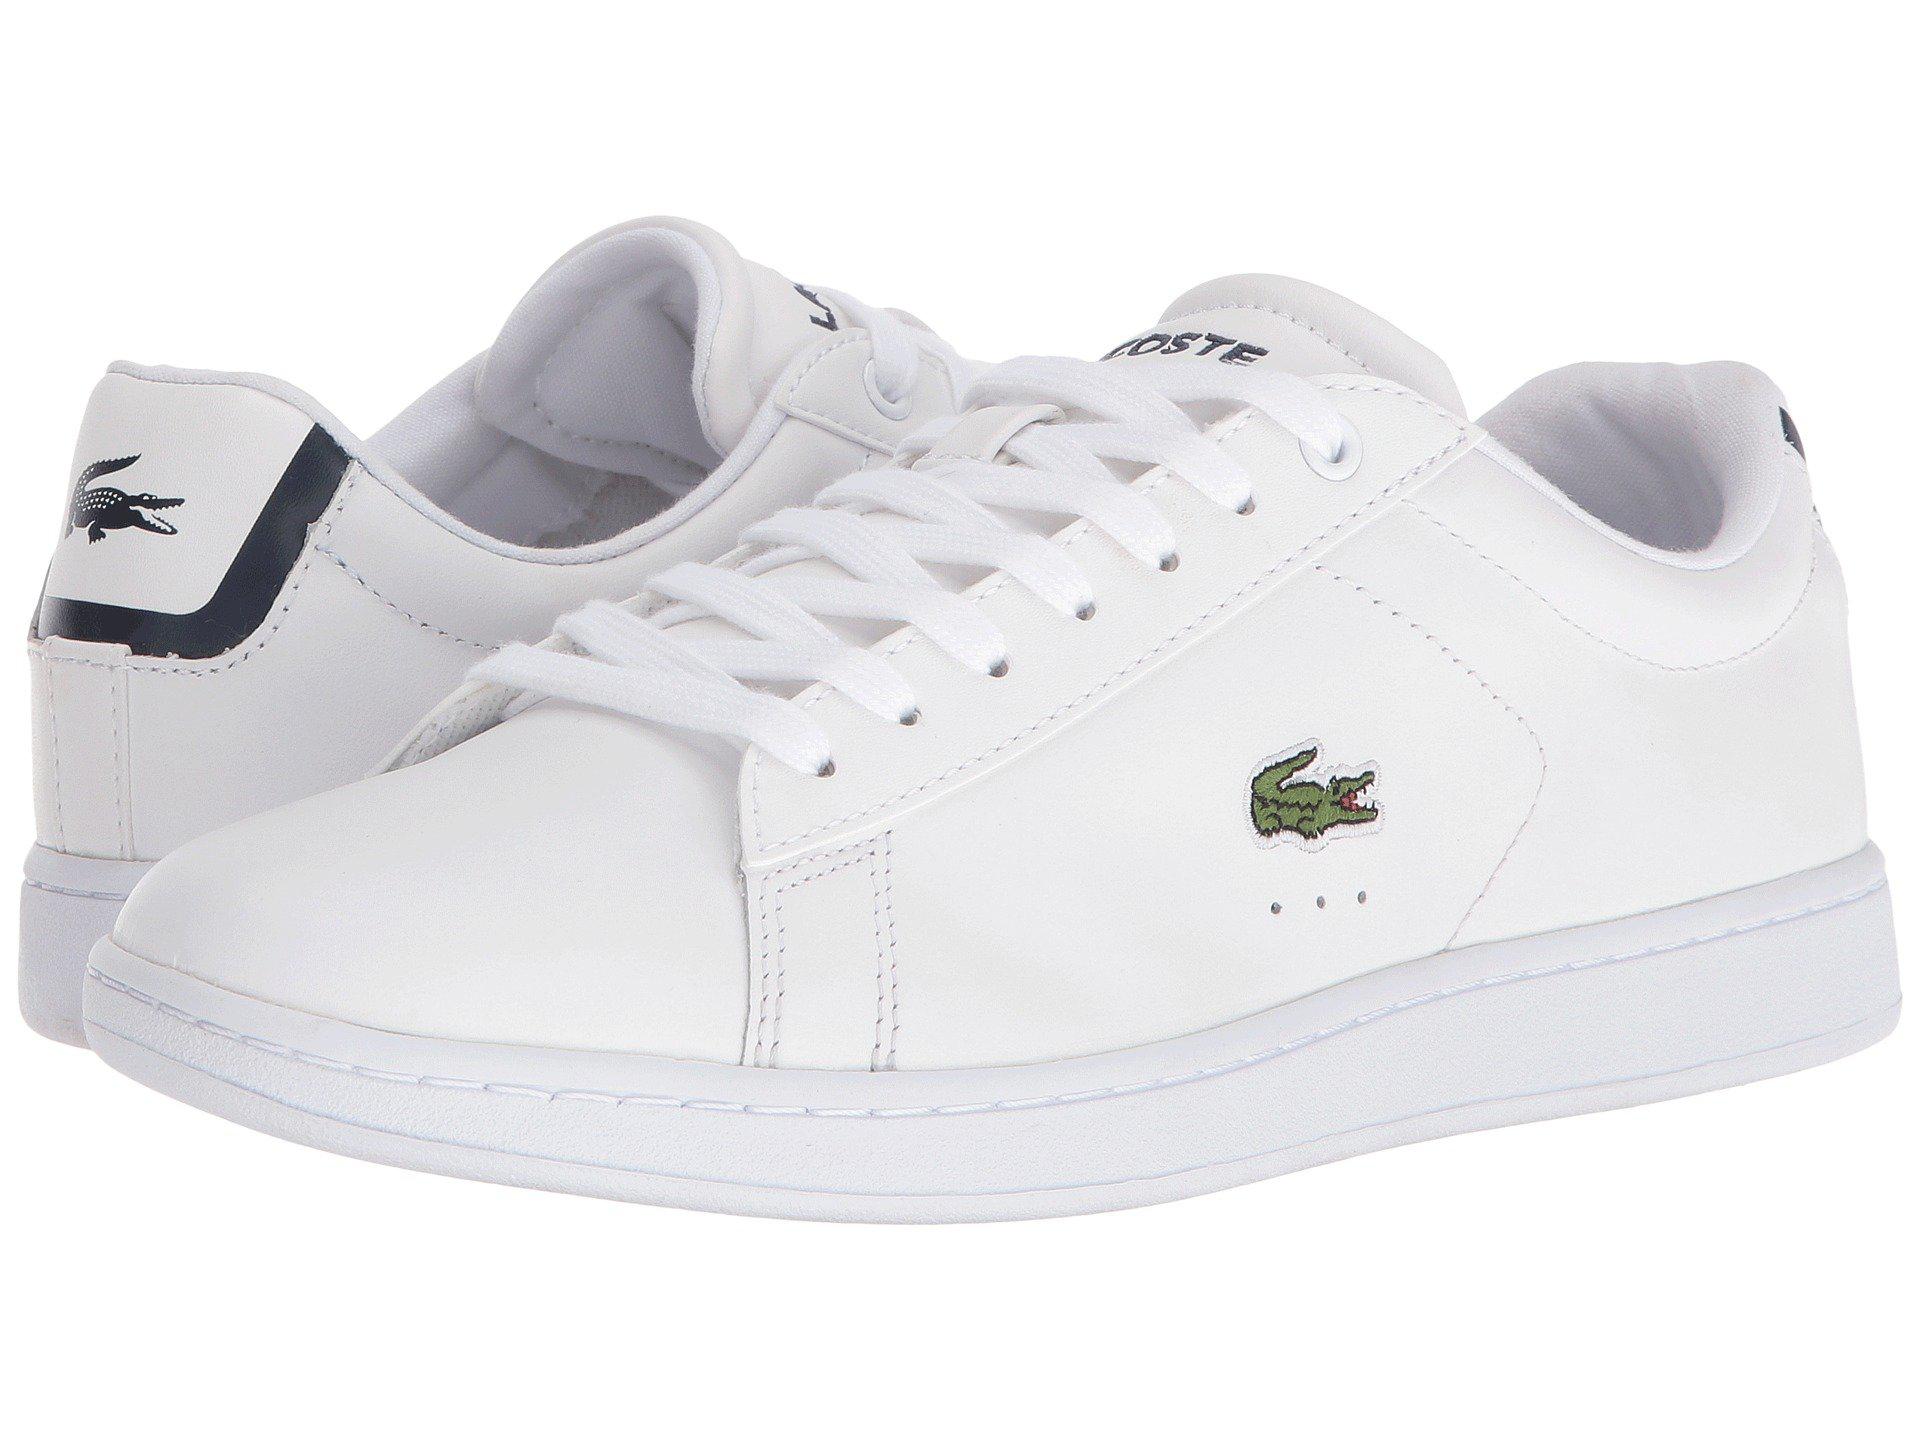 Lacoste Leather Carnaby Evo Bl 1 in 